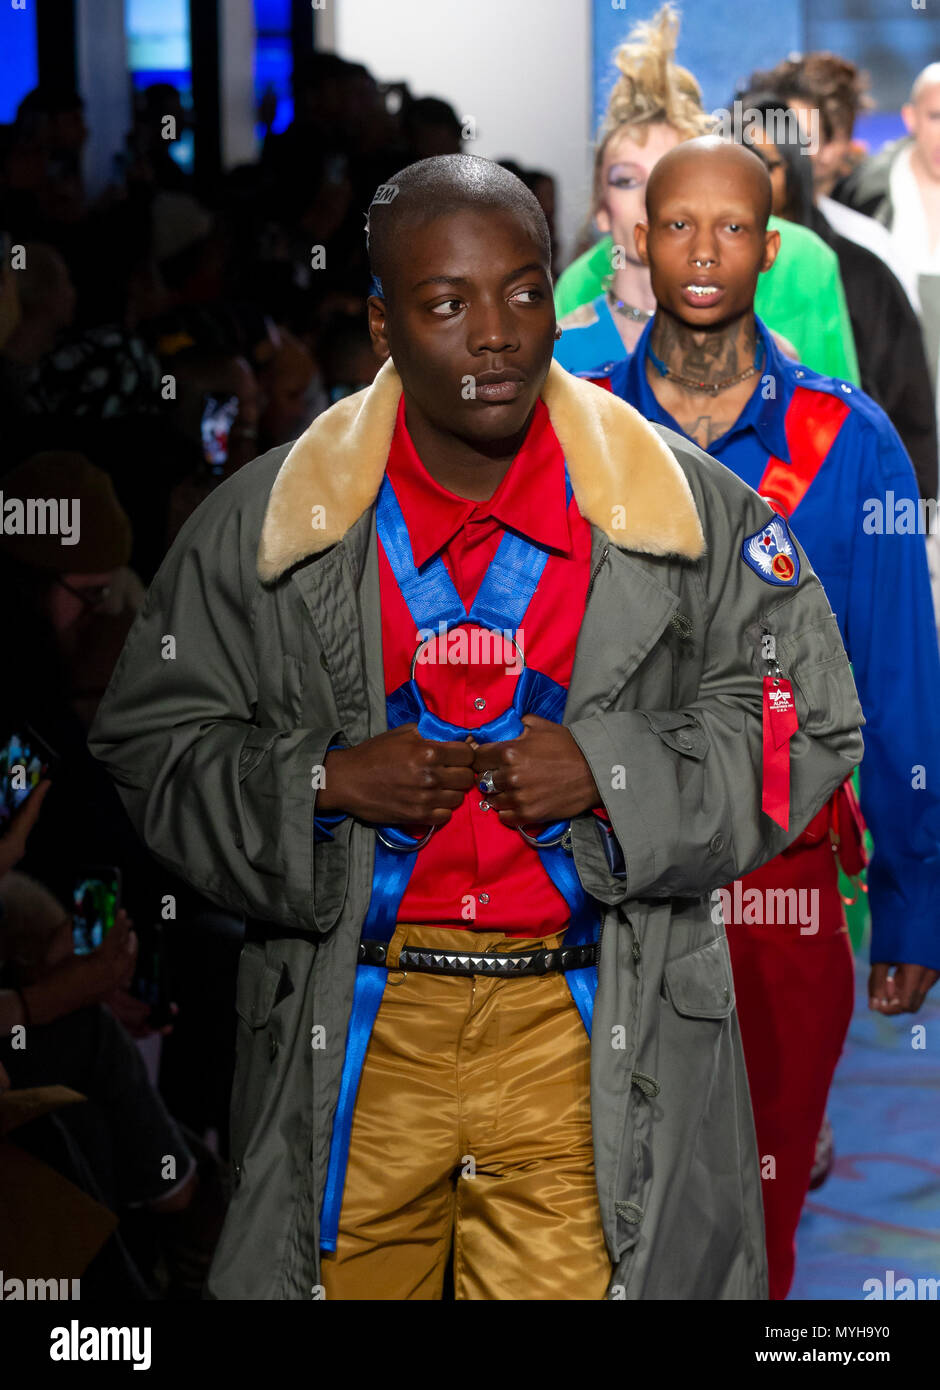 NEW YORK, NY - Feb 07, 2018: Models walk the runway at the Landlord Show during New York Fashion Week Men's F/W 2018 Stock Photo